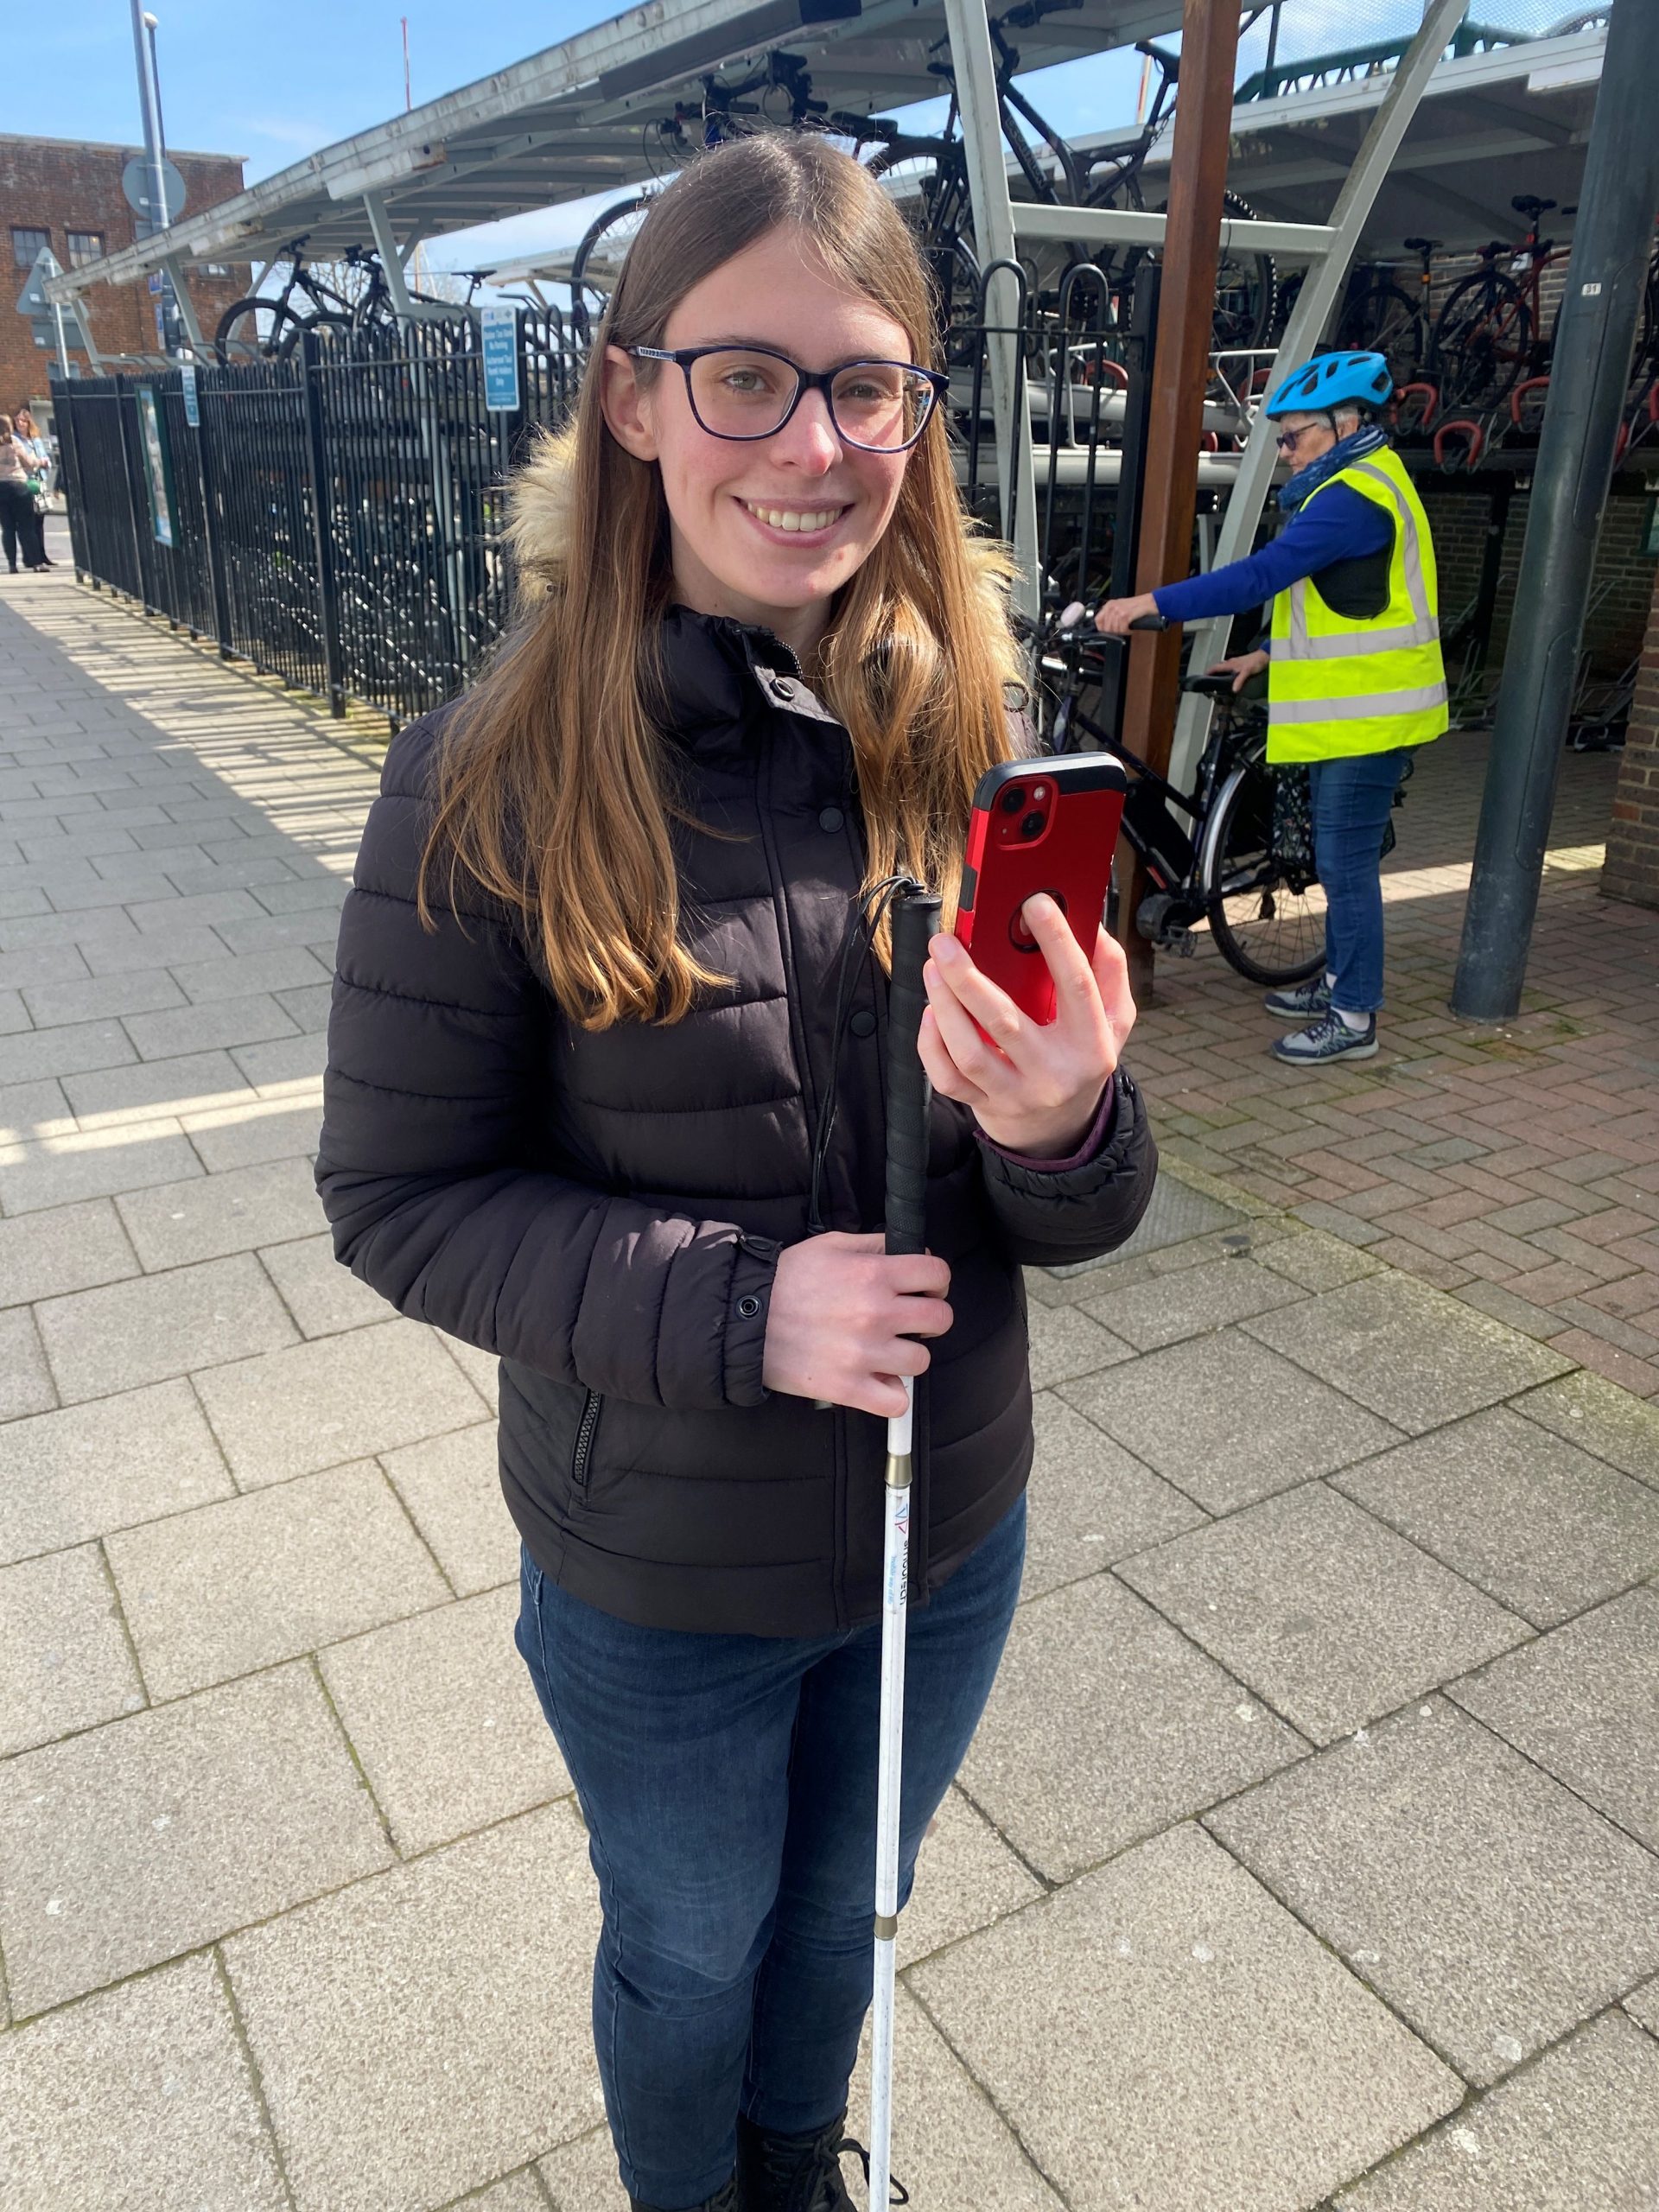 Lauren, SLC coordinator for South East England, pictured at Chichester station. She is holding her cane in one hand, and smart phone in the other. She is smiling at the camera.